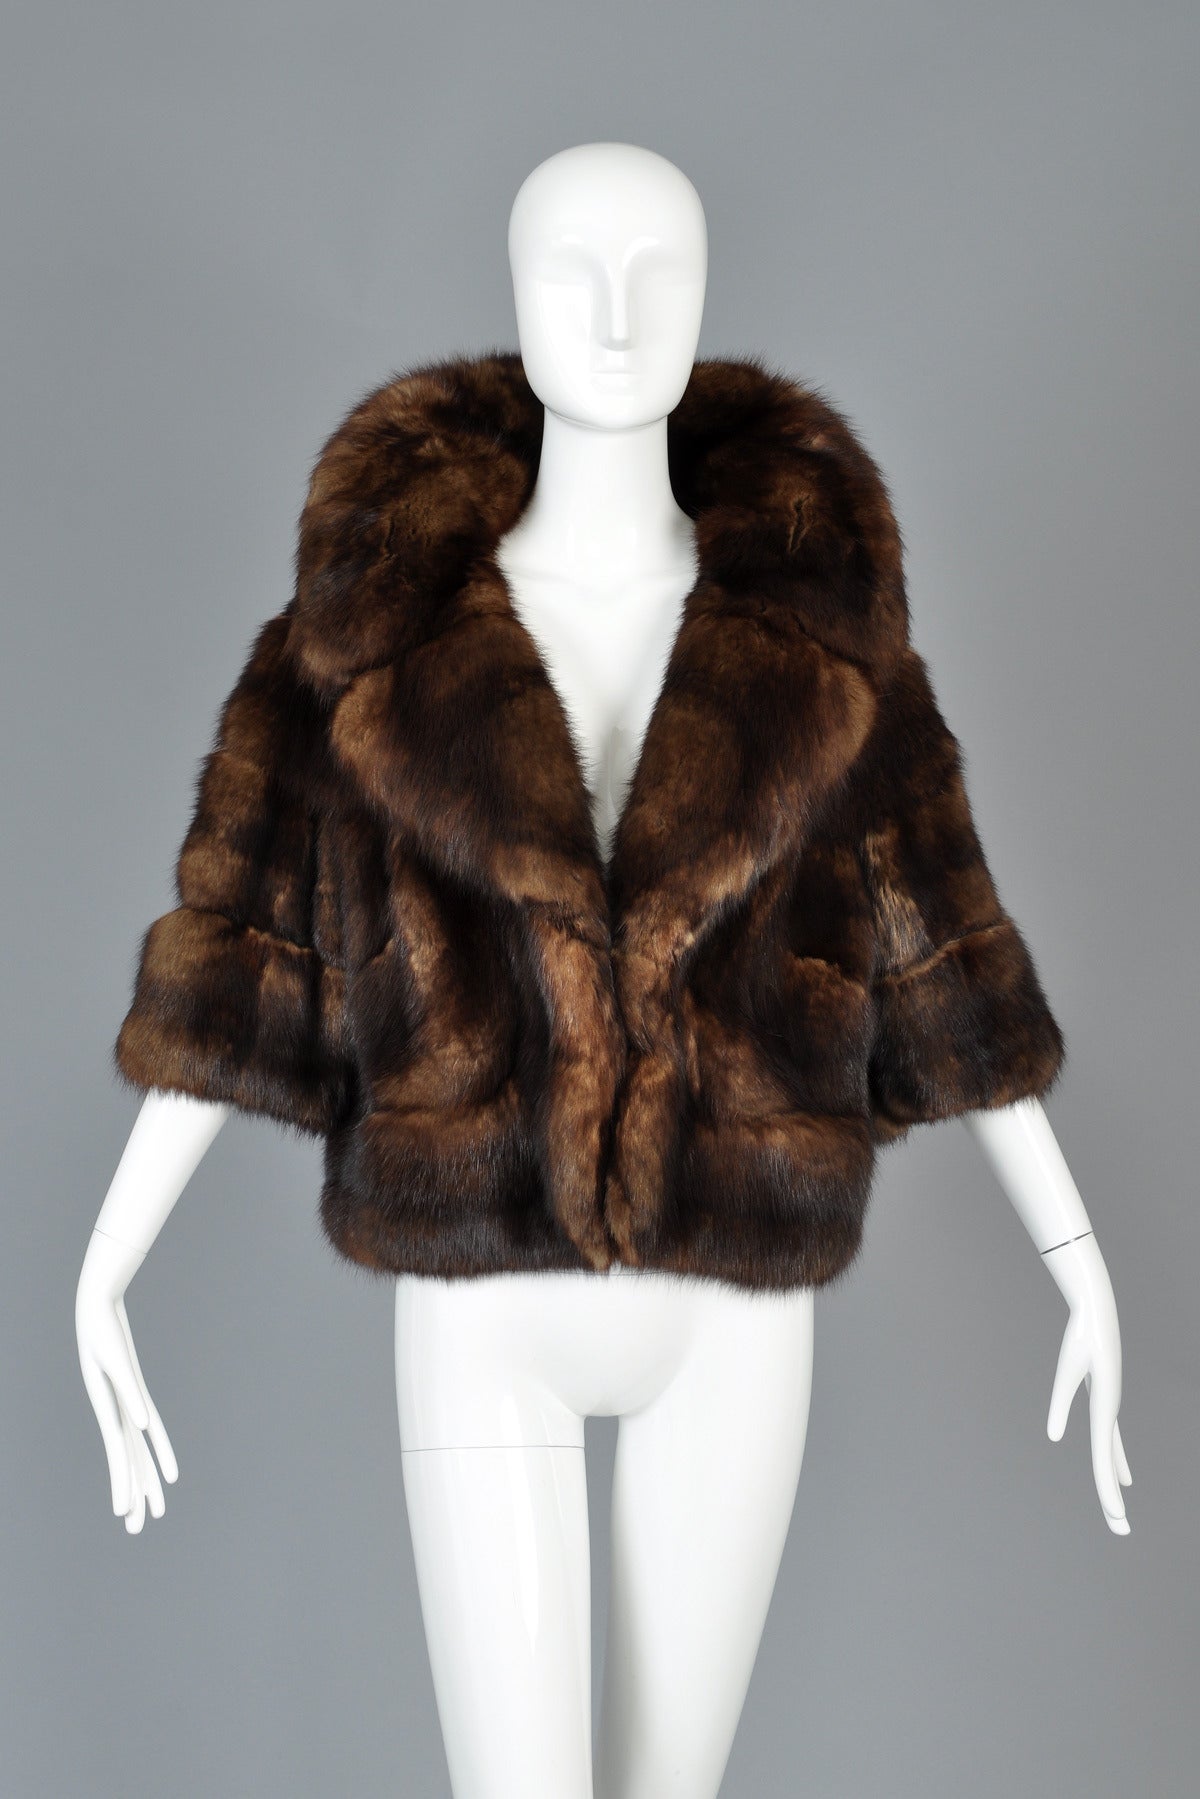 Truly stunning vintage 1960s genuine natural Russian Sable cropped trapeze coat. Such a rare, hard to find piece! Sable is the Mercedes Benz of furs and a full length sable coat usually costs upwards of $100,000+ new. This little piece is so special